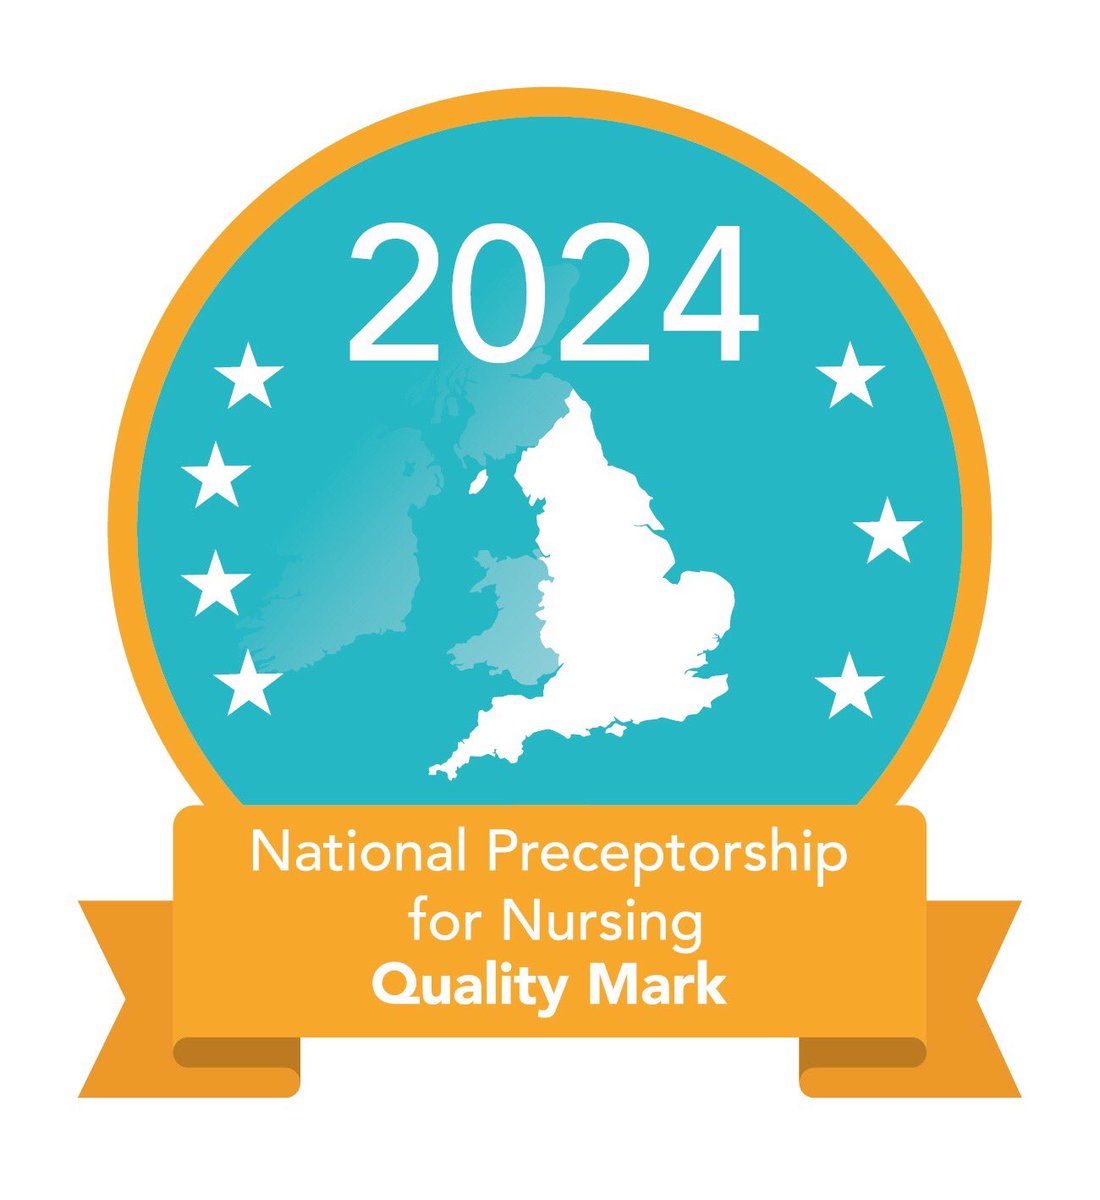 We’re proud to say that the support we provide is now award-winning & recognised with the National Preceptorship for Nursing Interim Quality Mark🎉Our LSCFT Preceptorship Lead Pam Dalton has done an amazing job supporting nursing/AHP preceptees through their career journeys!☺️👏🏼